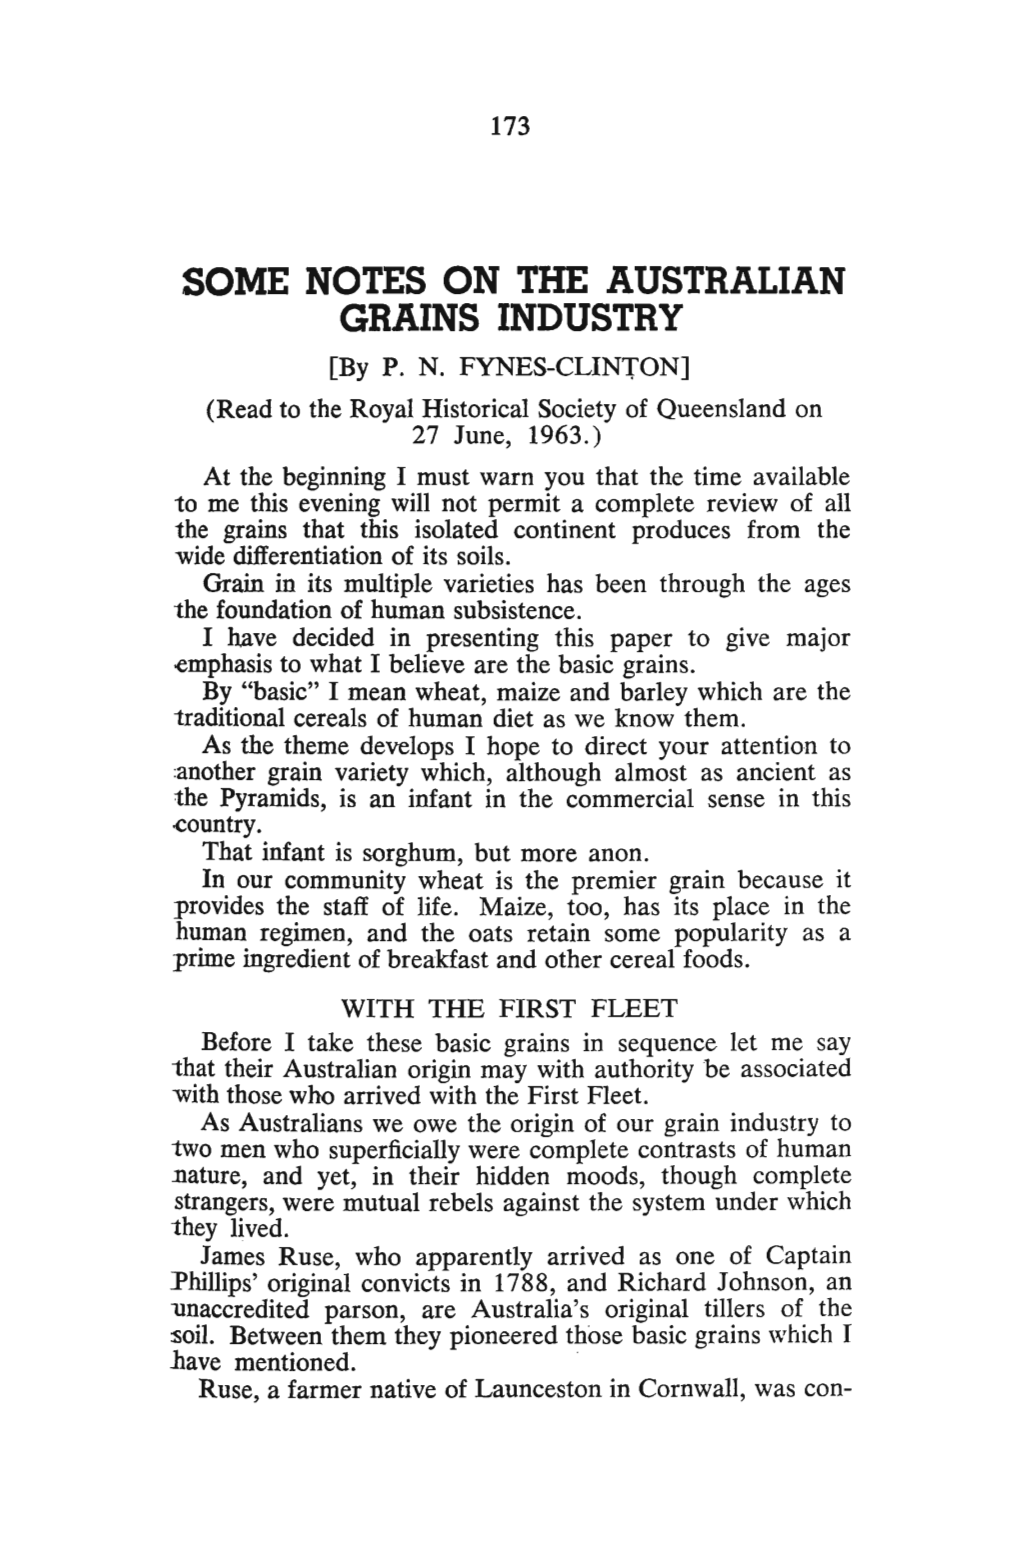 SOME NOTES on the AUSTRALIAN GRAINS INDUSTRY [By P